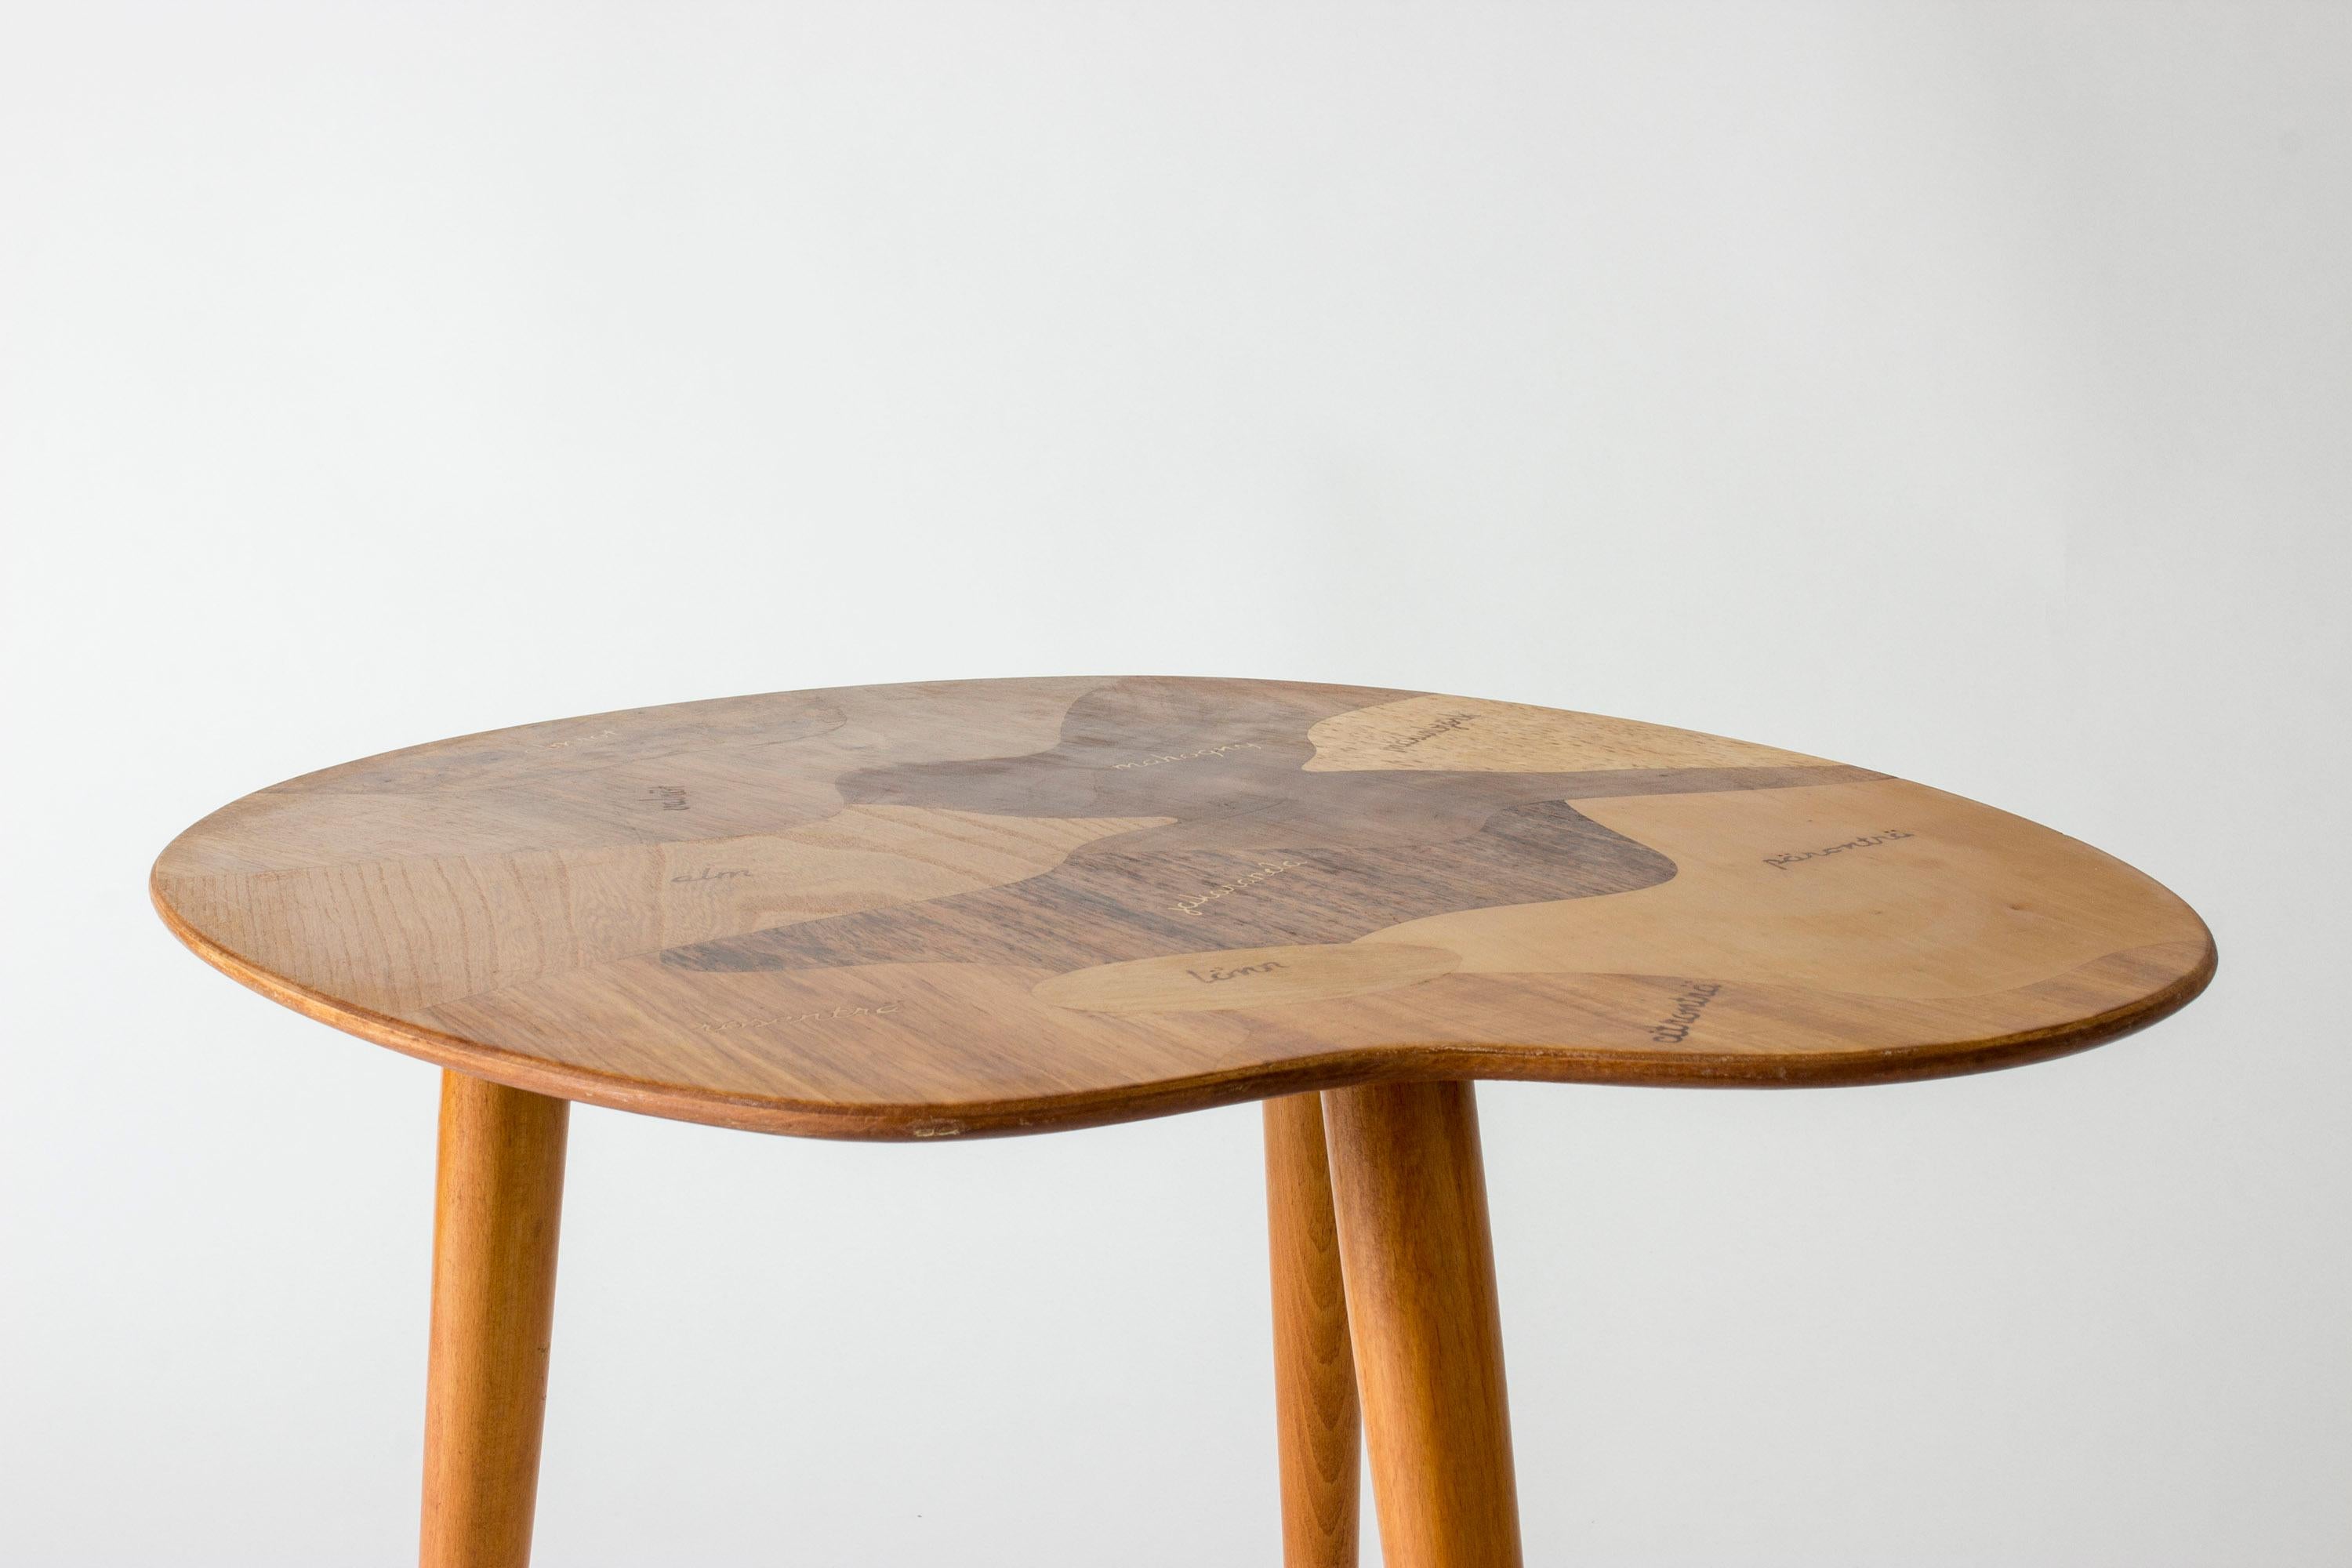 Wood Midcentury Side Table with Inlays, Sweden, 1950s For Sale